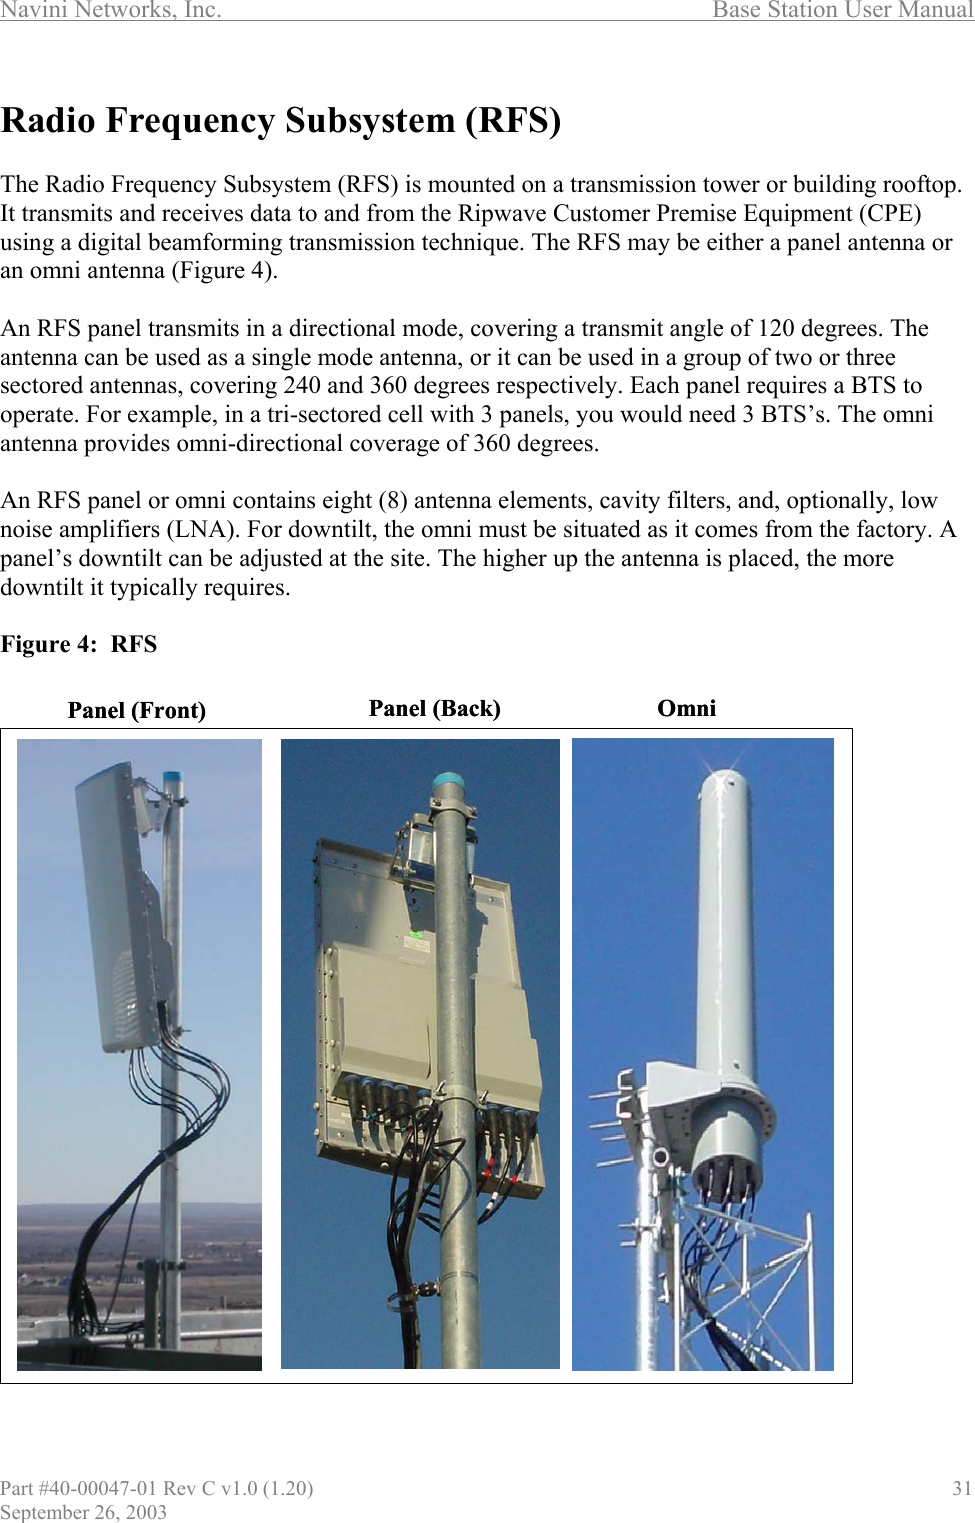 Navini Networks, Inc.                                  Base Station User Manual  Radio Frequency Subsystem (RFS)  The Radio Frequency Subsystem (RFS) is mounted on a transmission tower or building rooftop. It transmits and receives data to and from the Ripwave Customer Premise Equipment (CPE) using a digital beamforming transmission technique. The RFS may be either a panel antenna or an omni antenna (Figure 4).   An RFS panel transmits in a directional mode, covering a transmit angle of 120 degrees. The antenna can be used as a single mode antenna, or it can be used in a group of two or three sectored antennas, covering 240 and 360 degrees respectively. Each panel requires a BTS to operate. For example, in a tri-sectored cell with 3 panels, you would need 3 BTS’s. The omni antenna provides omni-directional coverage of 360 degrees.  An RFS panel or omni contains eight (8) antenna elements, cavity filters, and, optionally, low noise amplifiers (LNA). For downtilt, the omni must be situated as it comes from the factory. A panel’s downtilt can be adjusted at the site. The higher up the antenna is placed, the more downtilt it typically requires.  Figure 4:  RFS                            Panel (Front) OmniPanel (Back) Panel (Front) OmniPanel (Back)Part #40-00047-01 Rev C v1.0 (1.20)                               31 September 26, 2003 